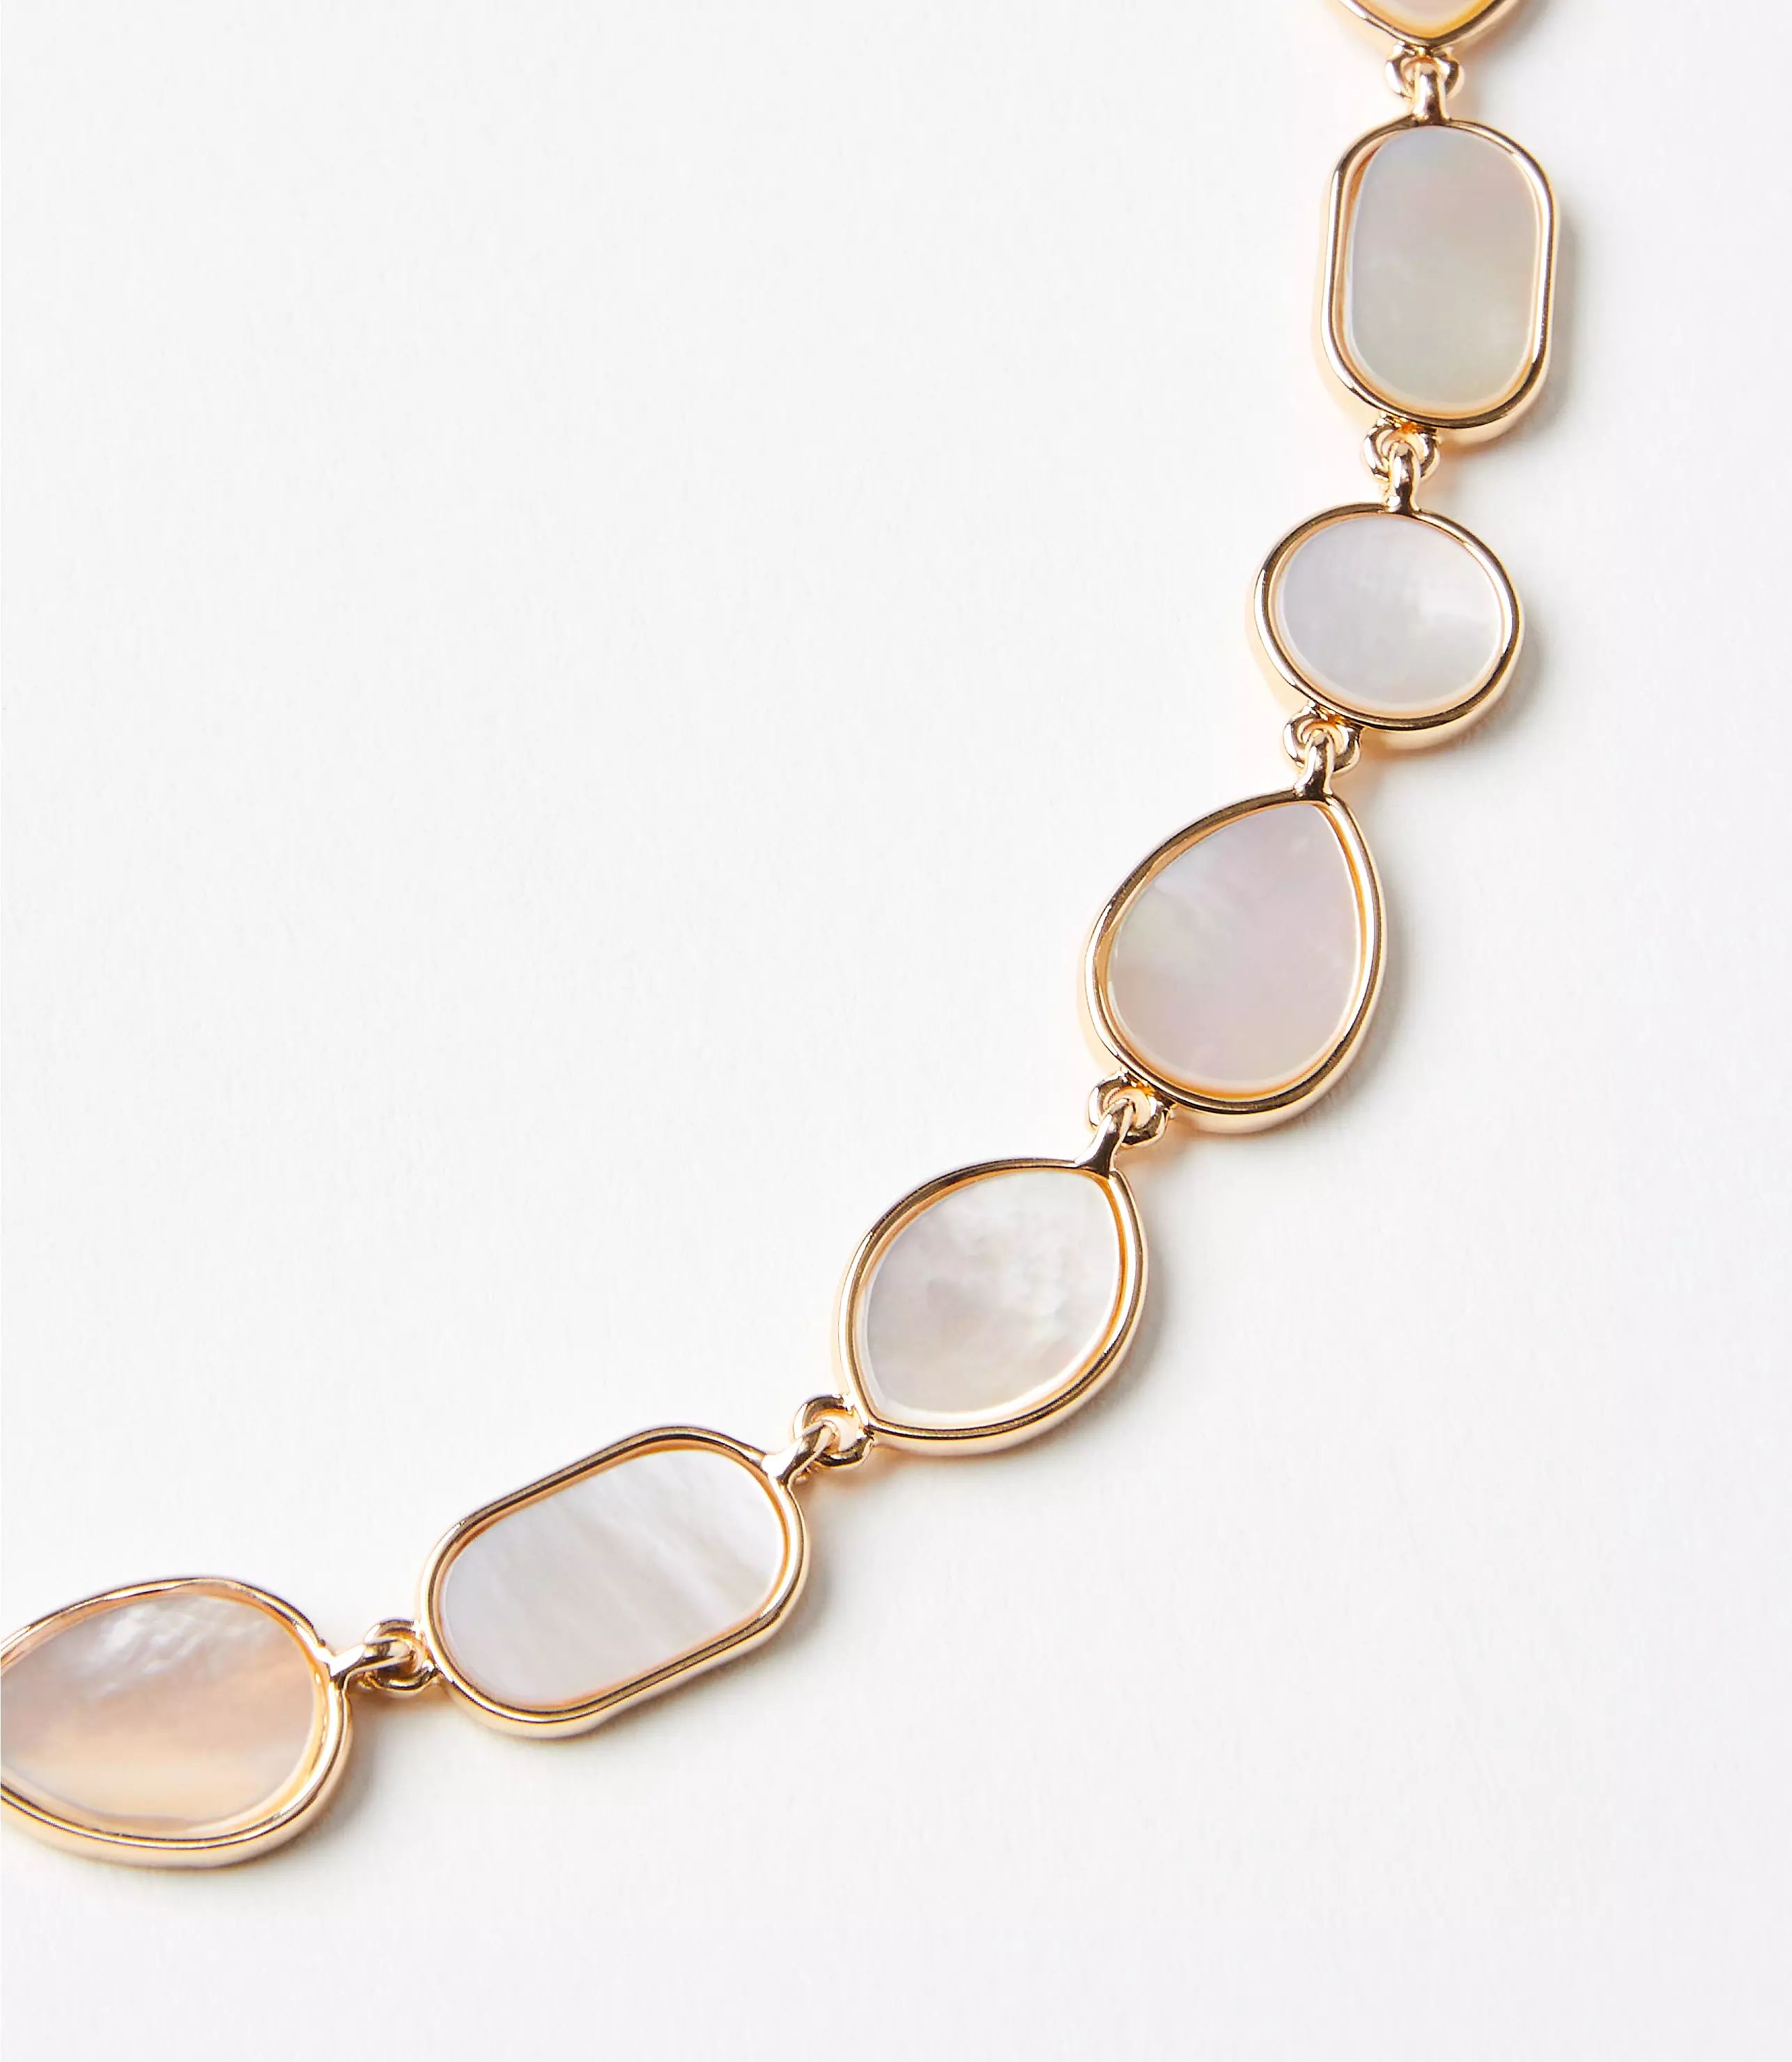 Mother Of Pearl Statement Necklace | LOFT